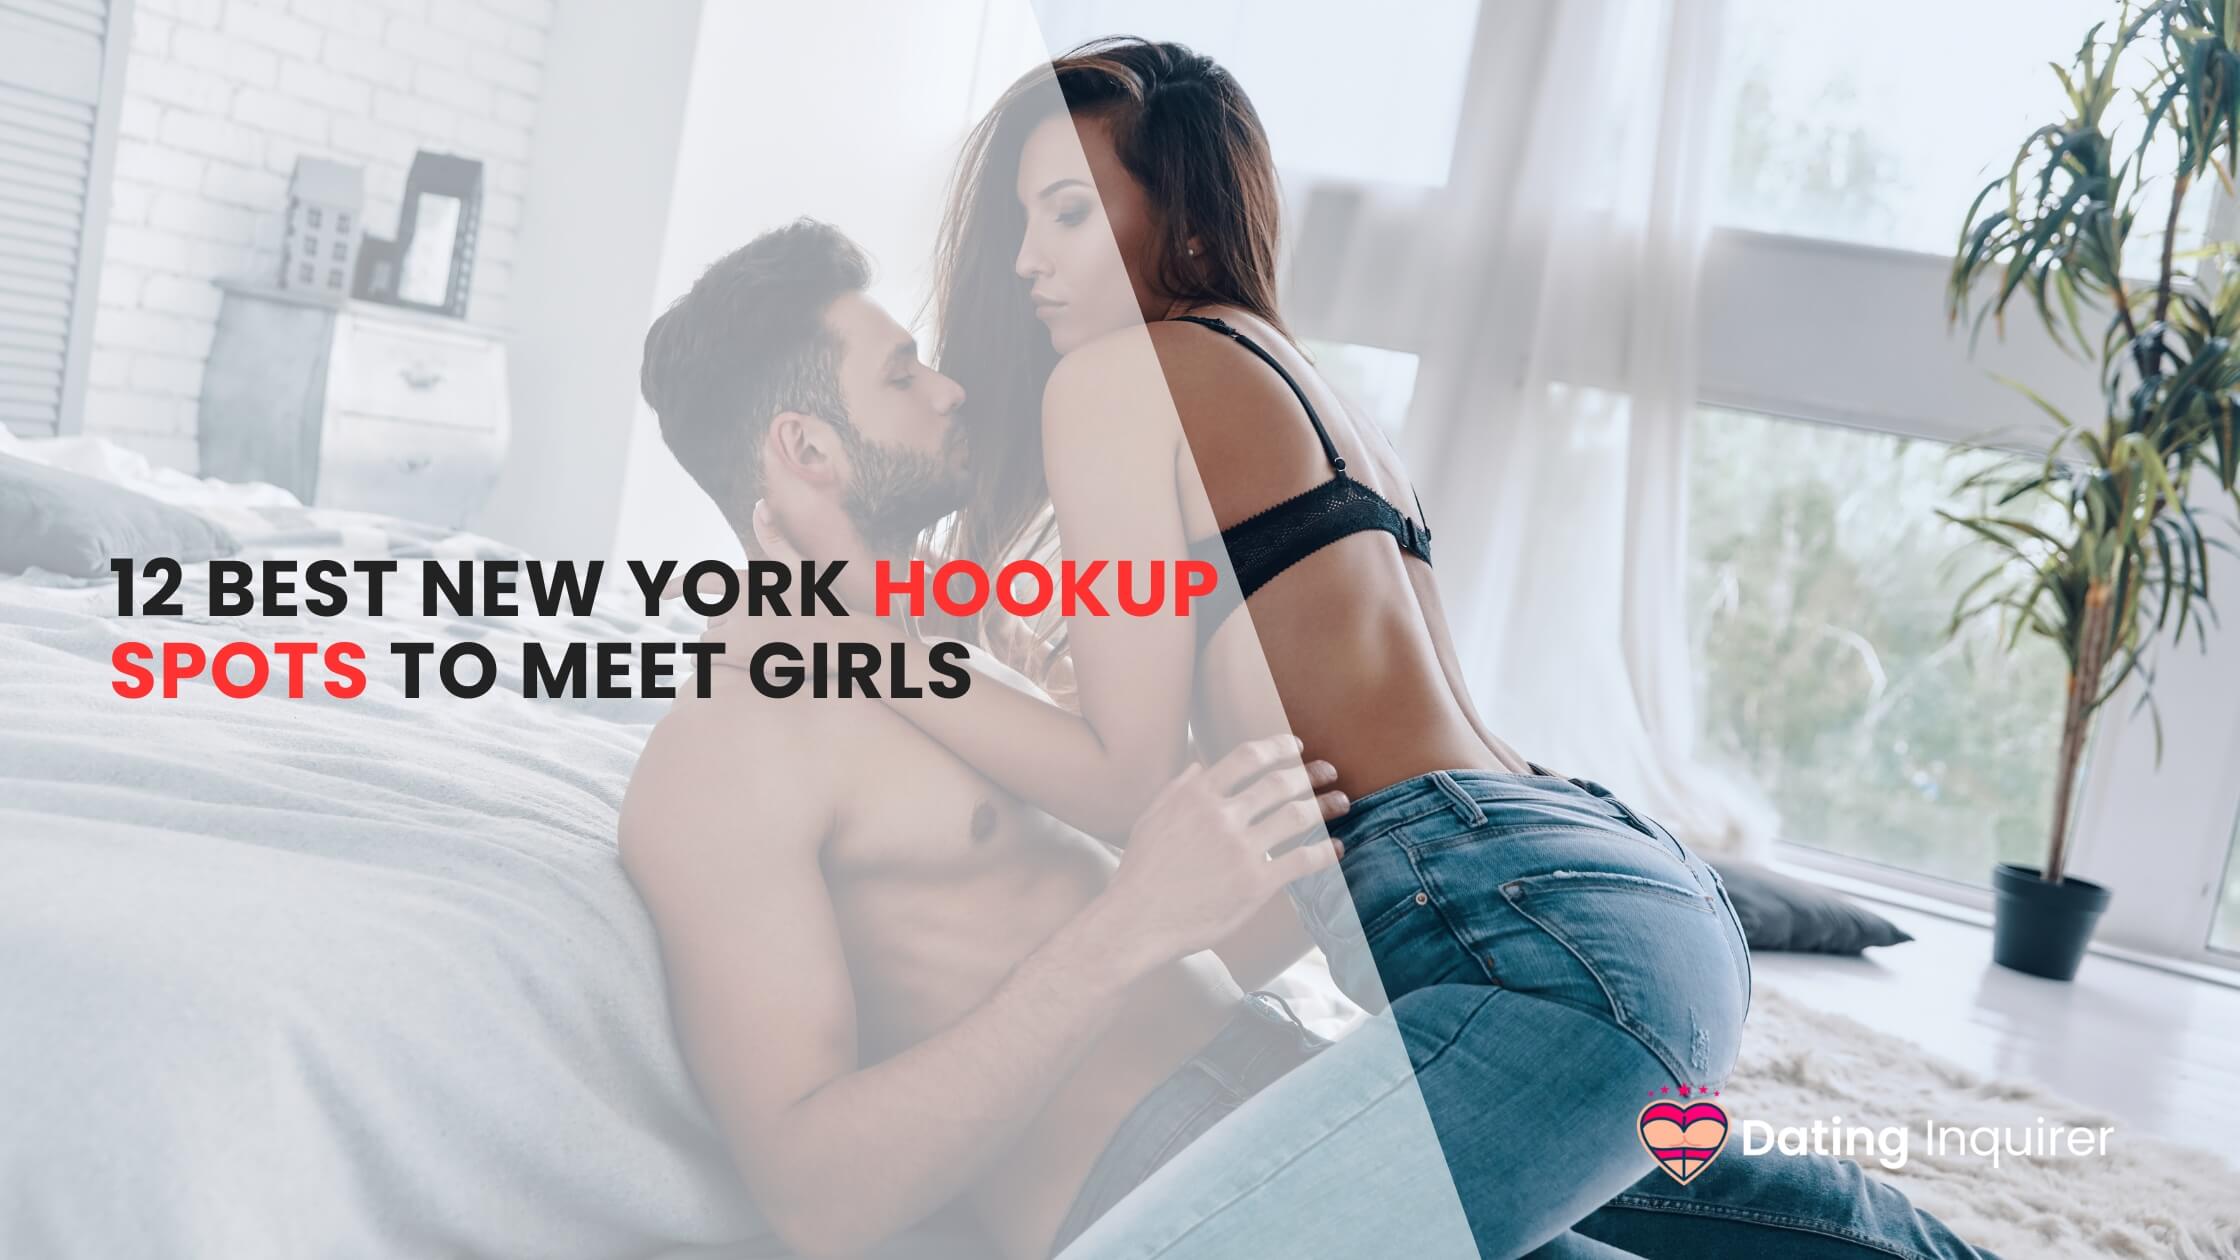 a woman from new york city is having sex during a hookup with a guy